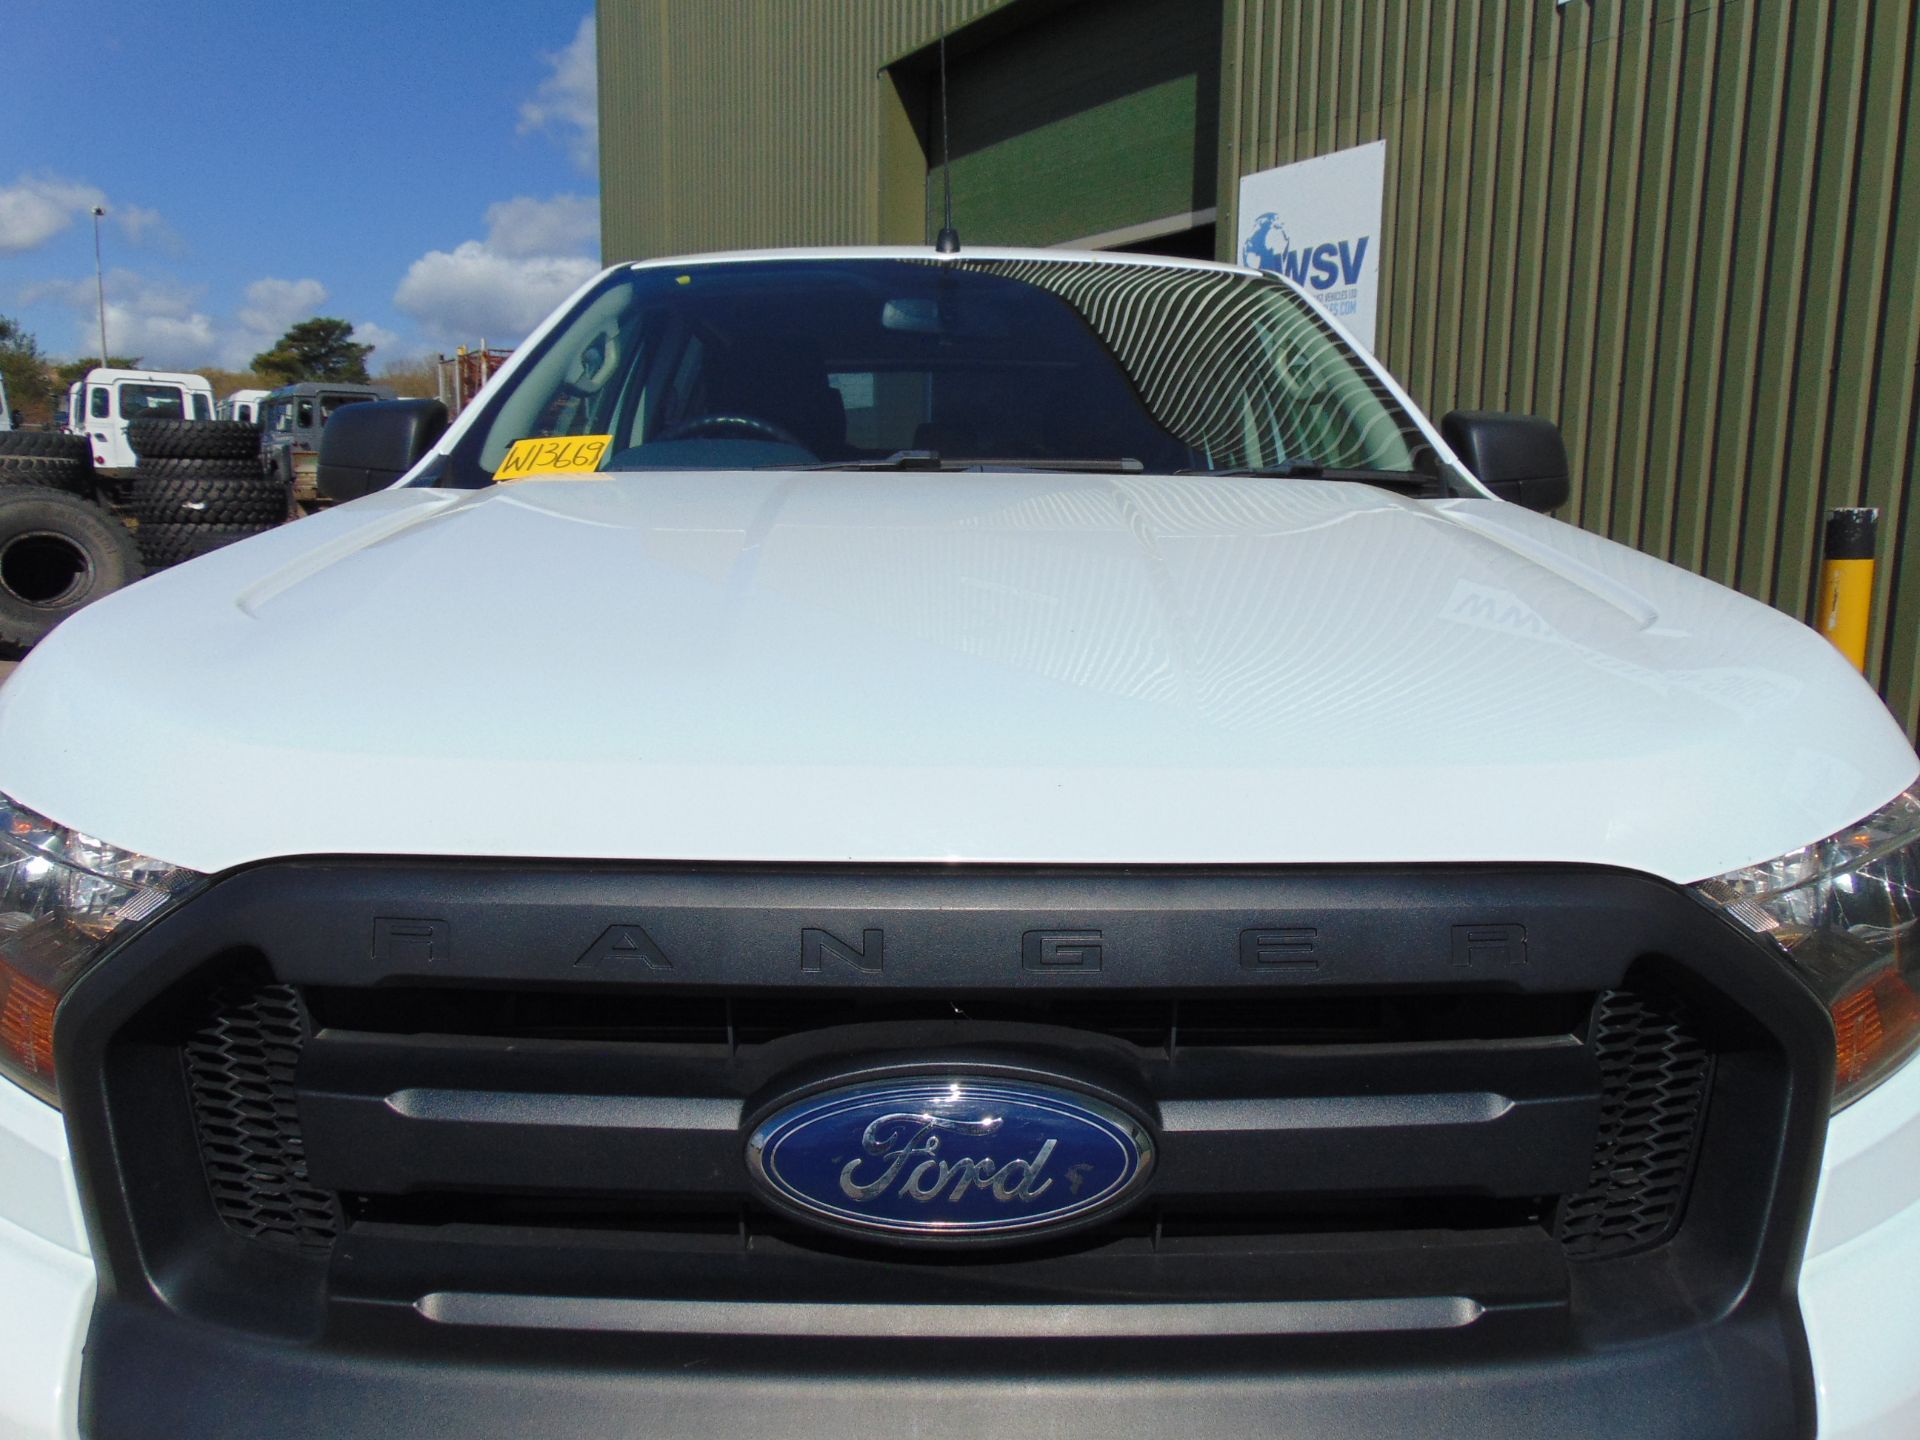 UK MoD 2017 Ford Ranger 2.2 6 Speed Double Cab ONLY 89,758 Miles! - Image 14 of 33